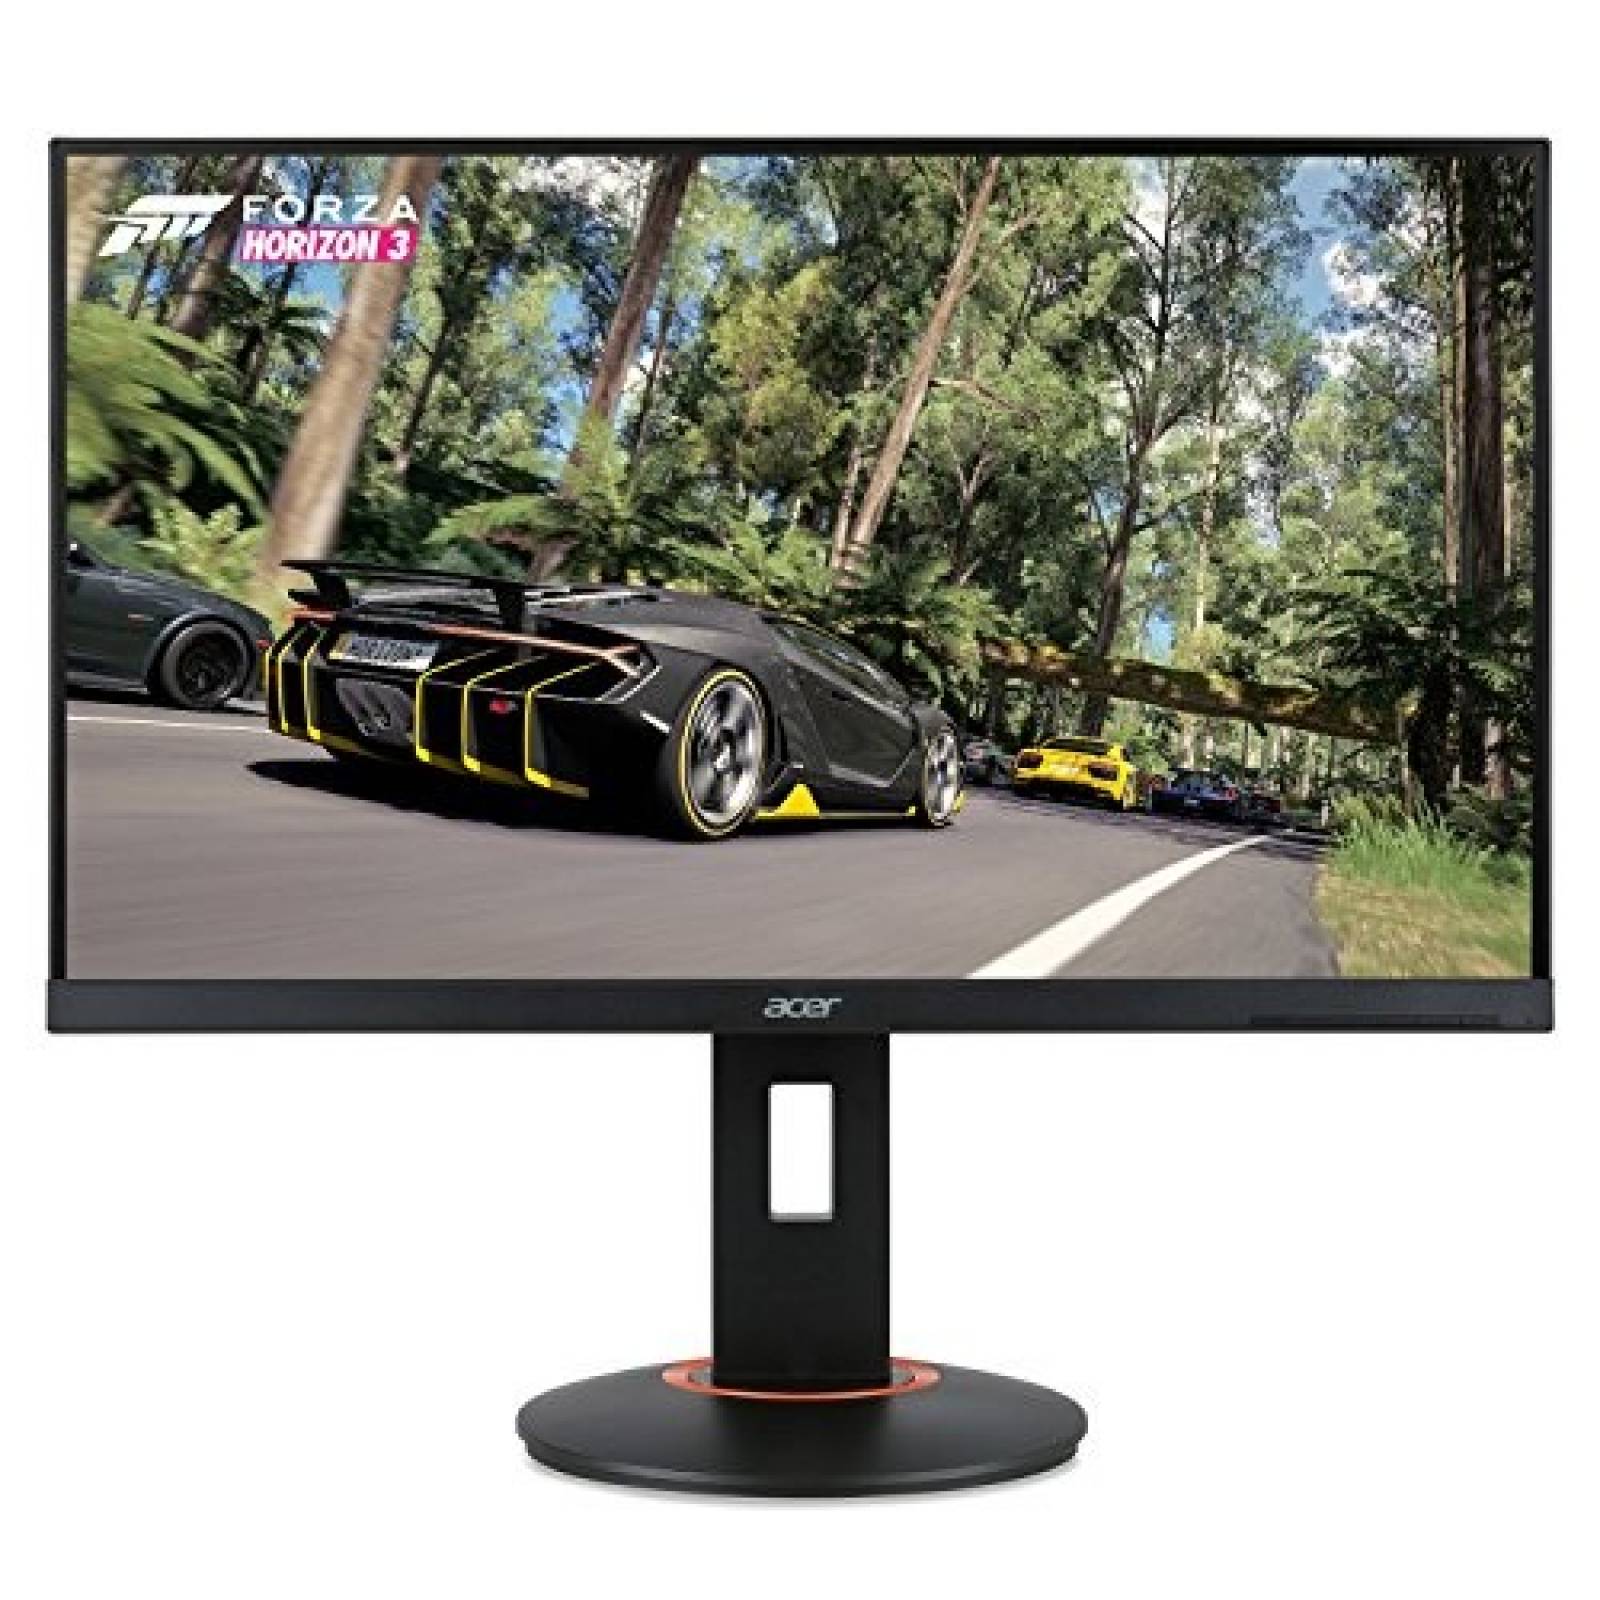 Monitor Acer XF250Q Cbmiiprx 24.5" Full 1920 x 1080